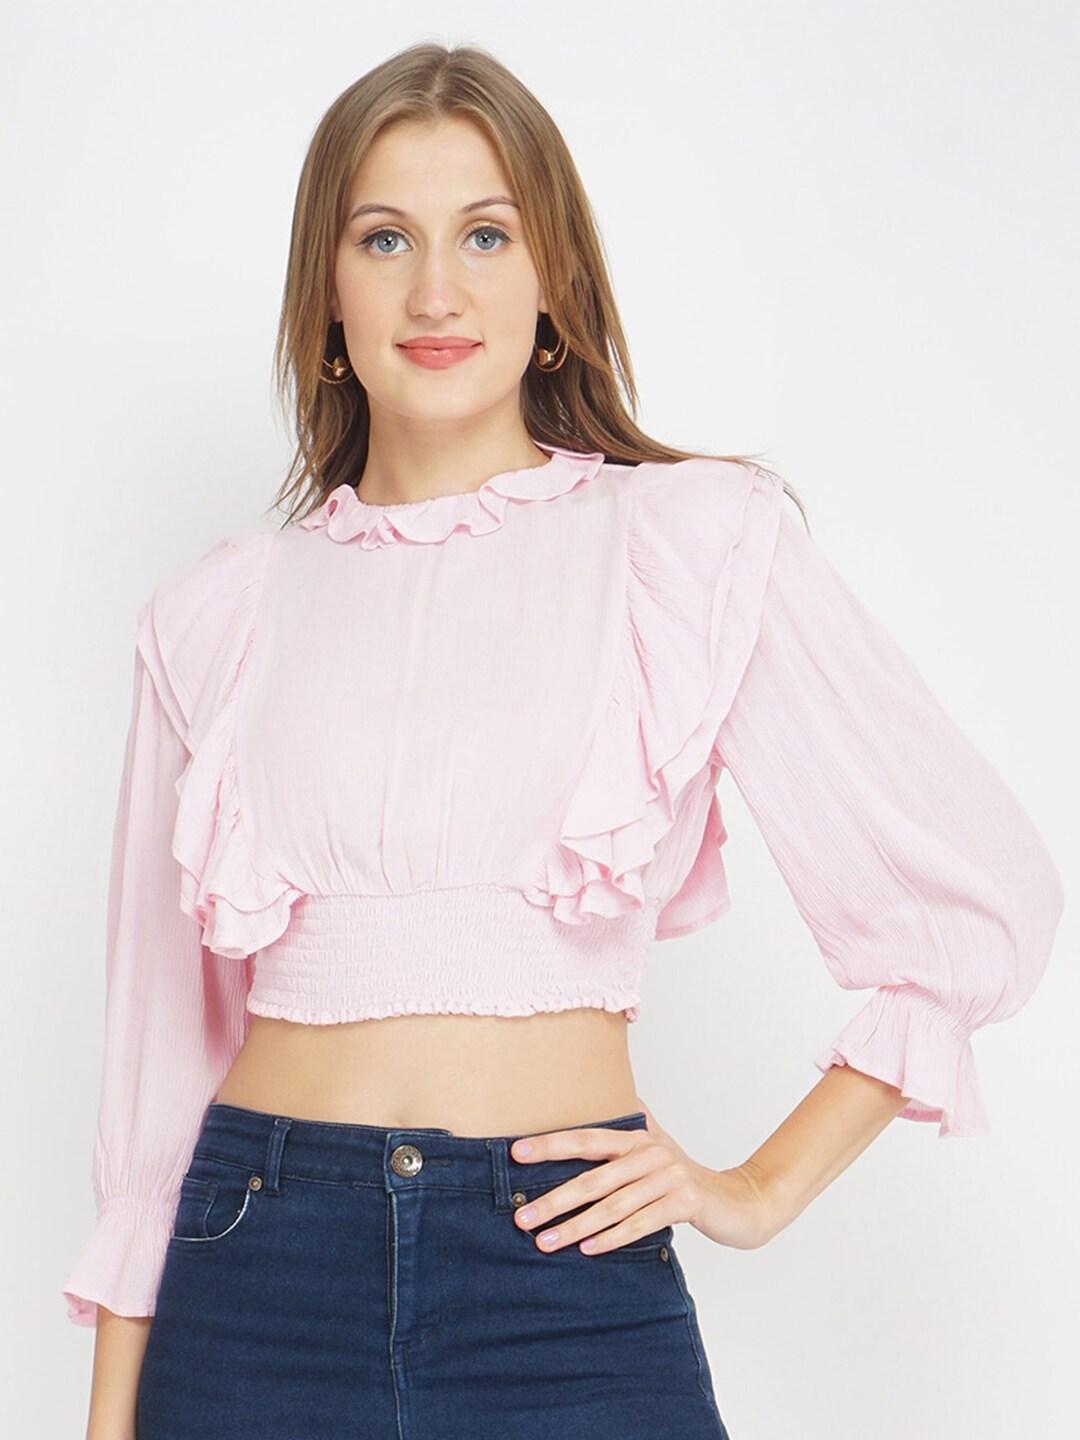 oxolloxo-pink-ruffles-crepe-styled-back-crop-top